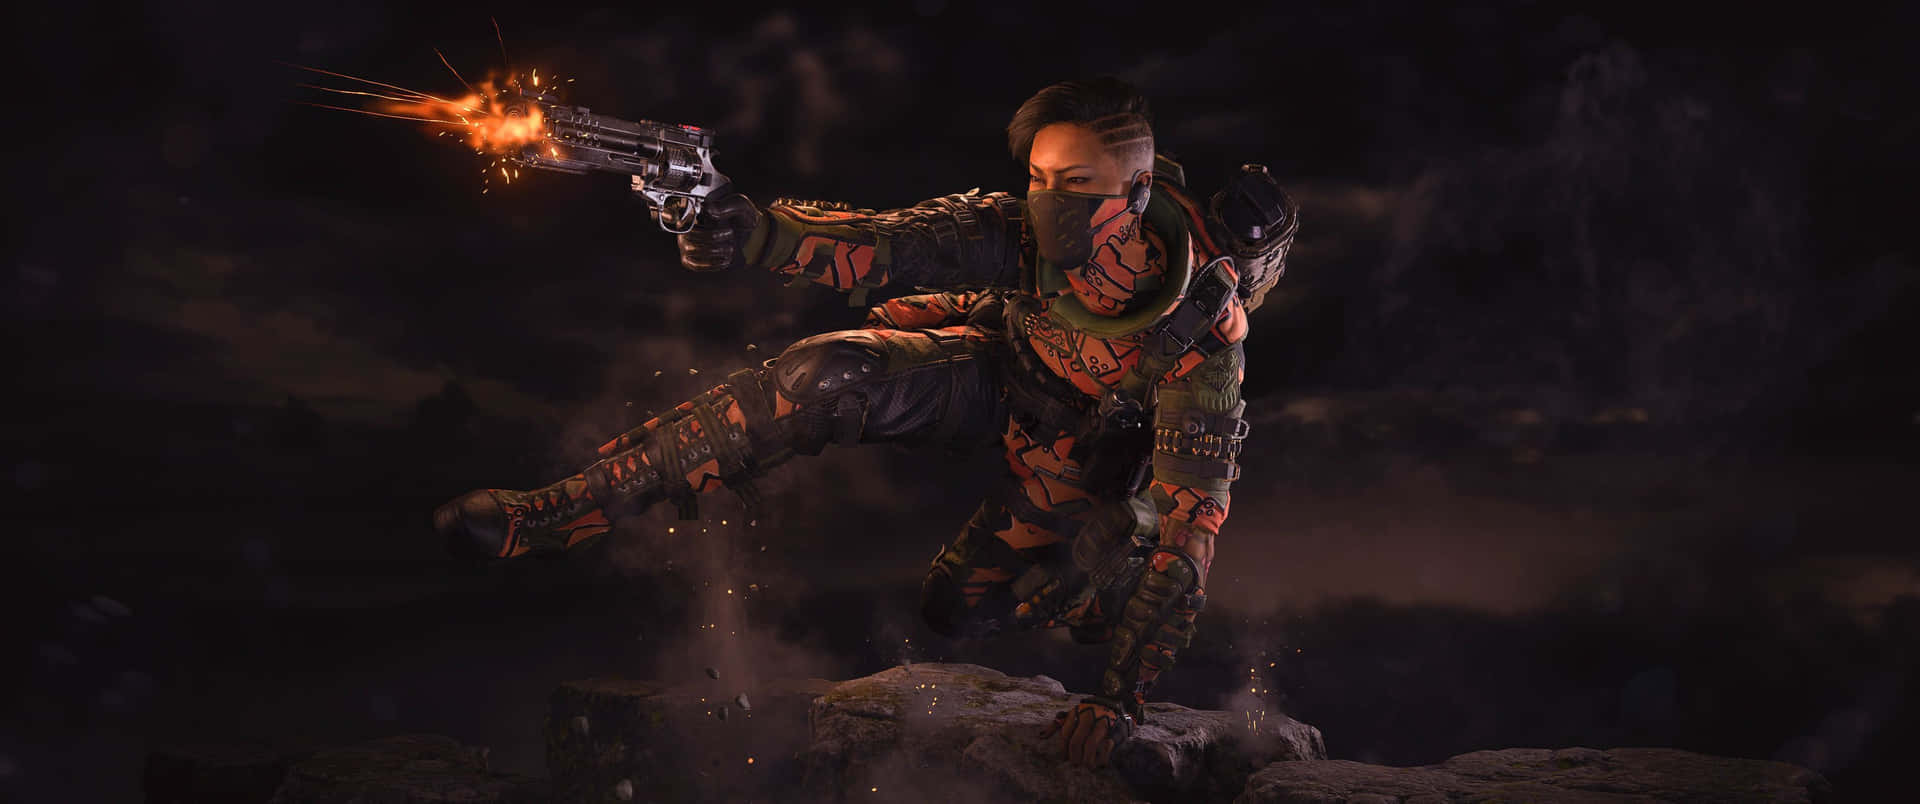 3440x1440 Game Call Of Duty: Black Ops 4 Wallpaper